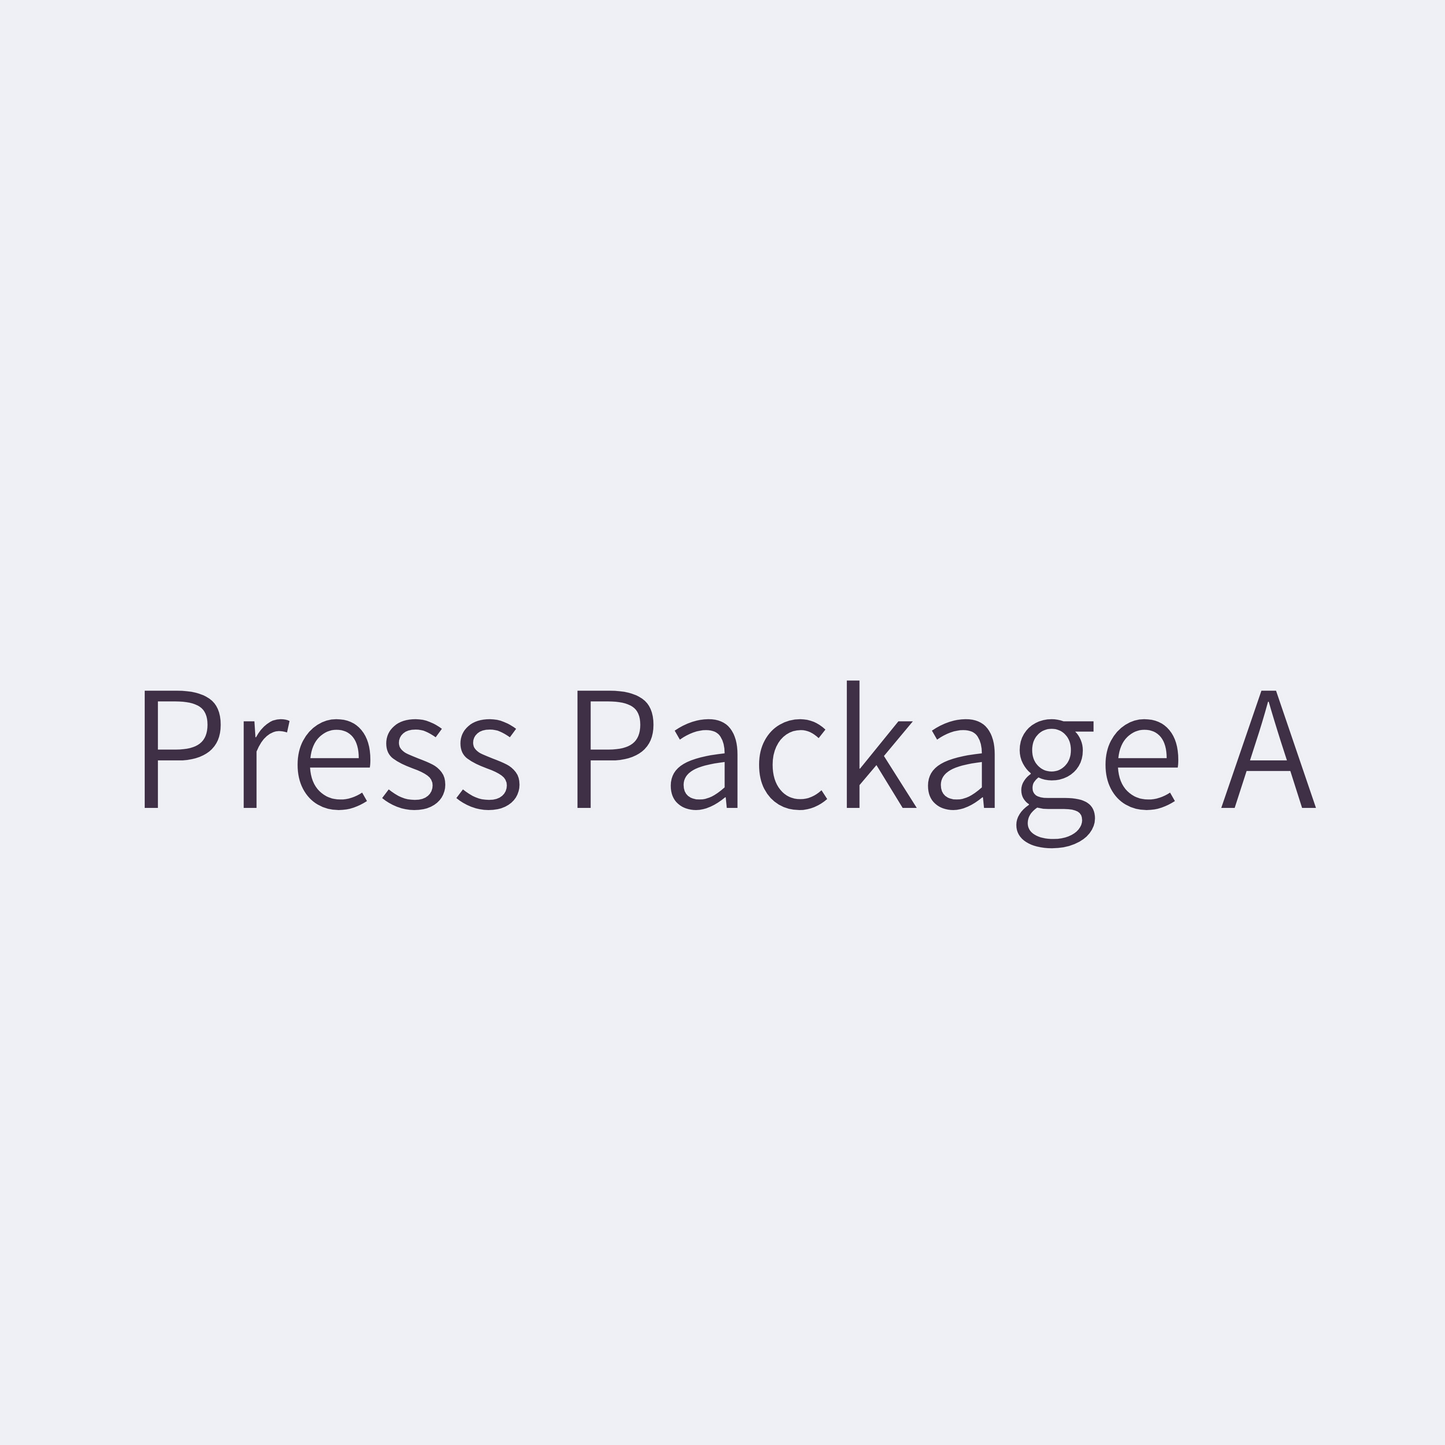 Press Package A